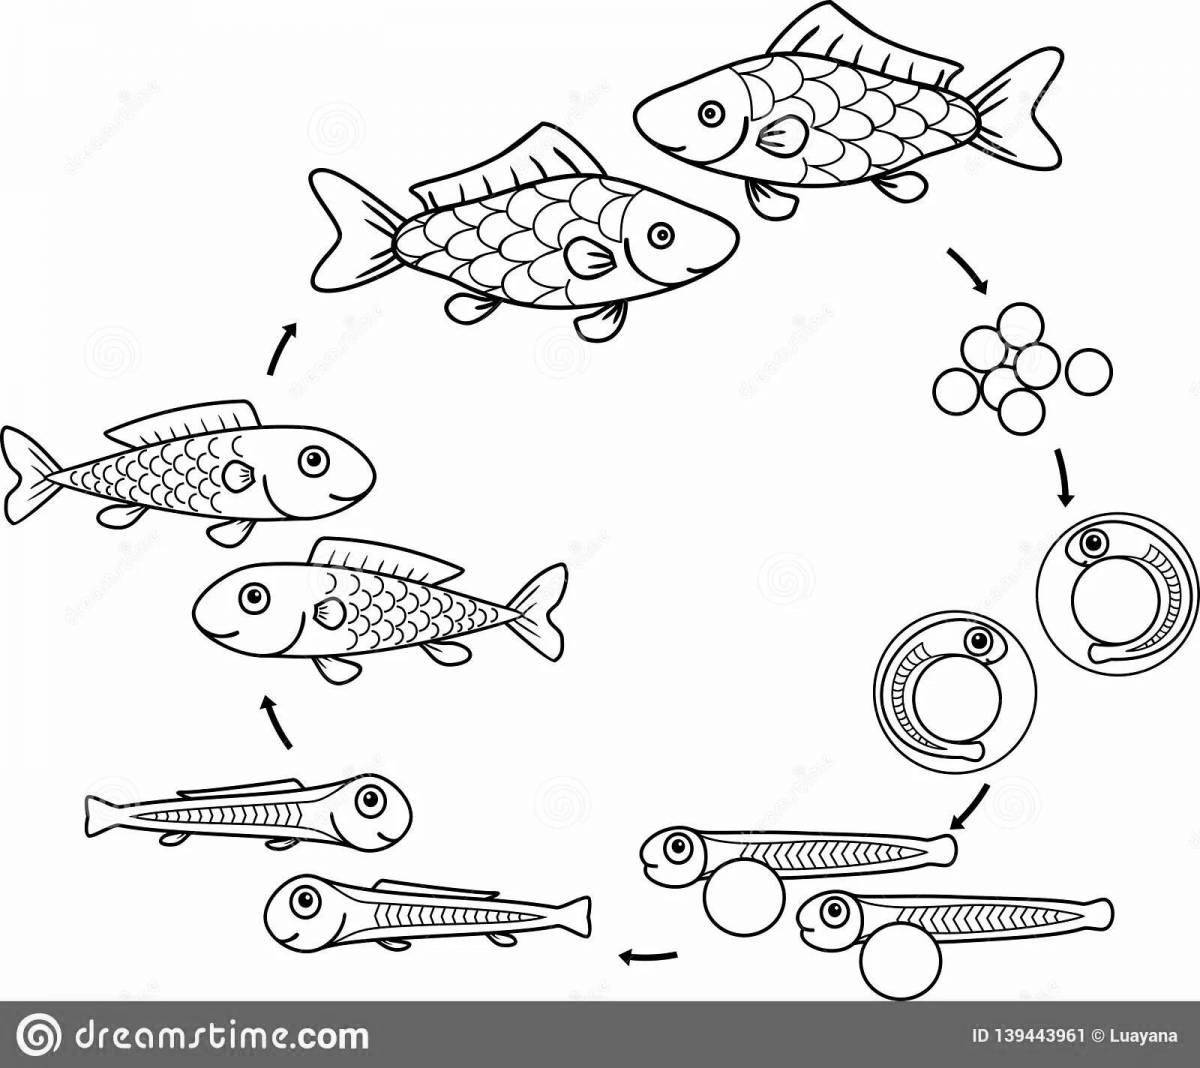 Example of fish structure coloring